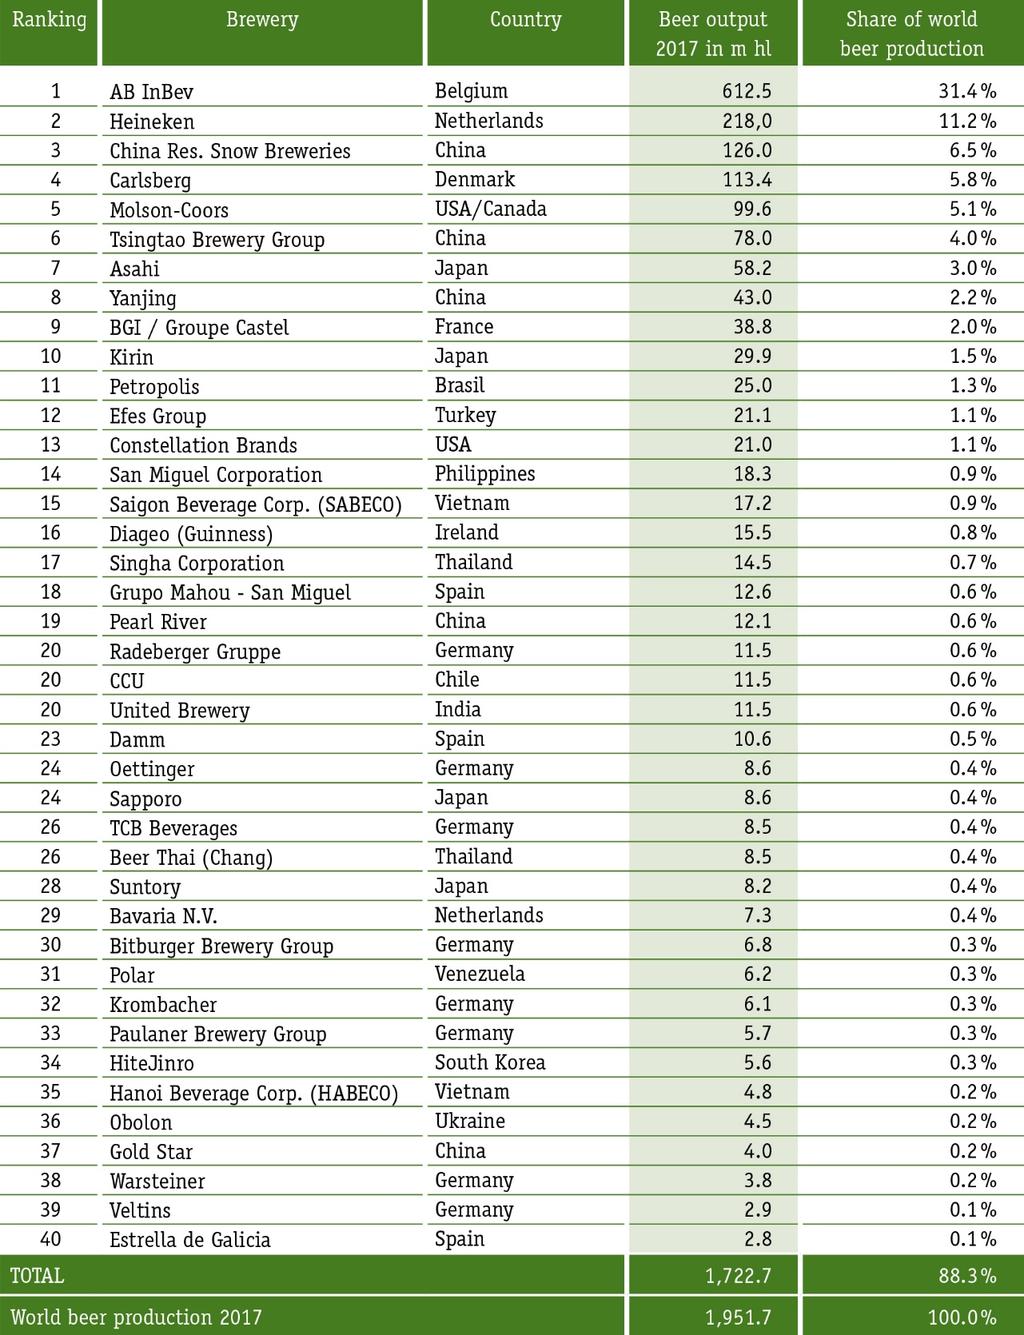 The world's top 40 brewing groups as of 31